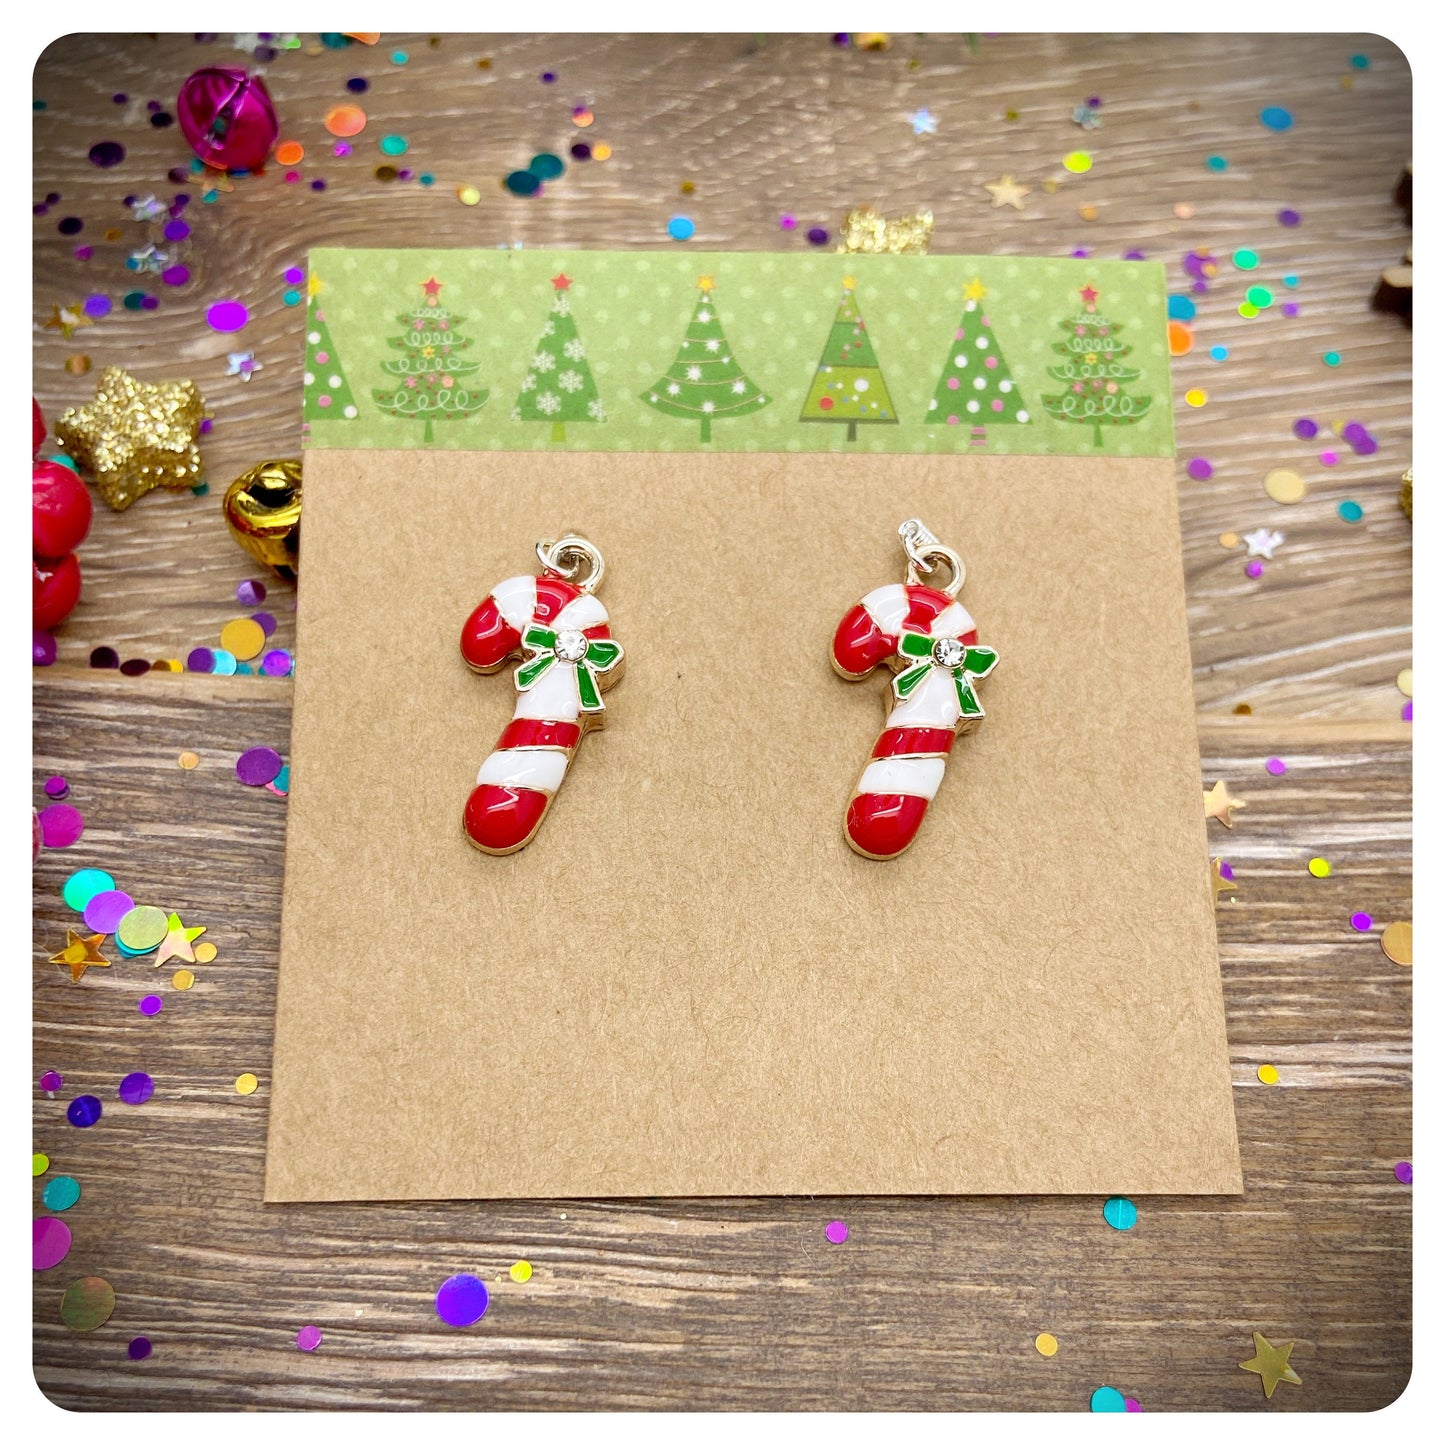 Candy Cane Necklace & Earrings Set, Novelty Christmas Jewellery Set, Stocking Filler Jewellery, Xmas Candy Cane Necklace Gift